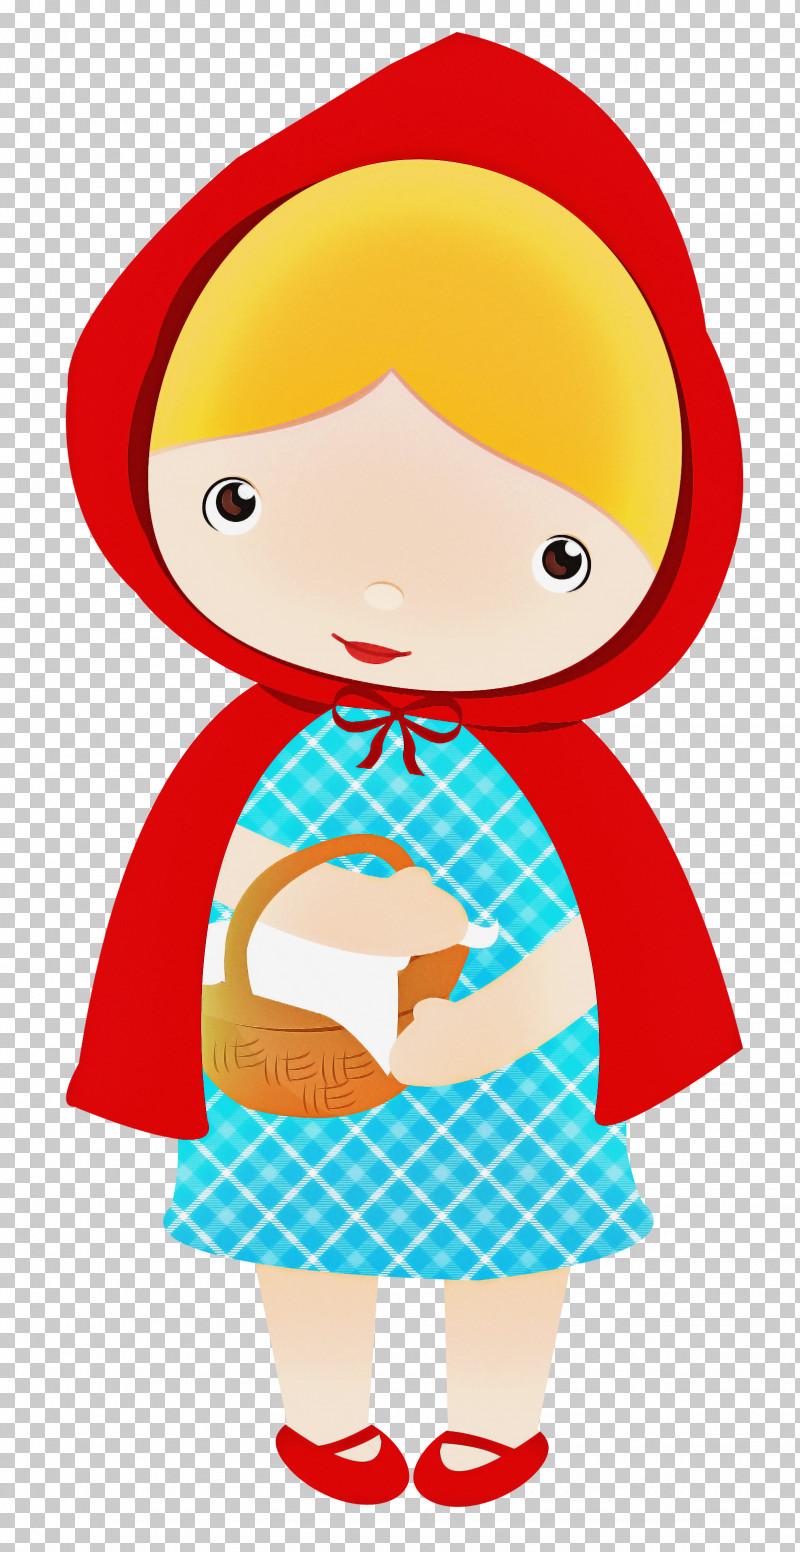 Cartoon Doll Child PNG, Clipart, Cartoon, Child, Doll Free PNG Download